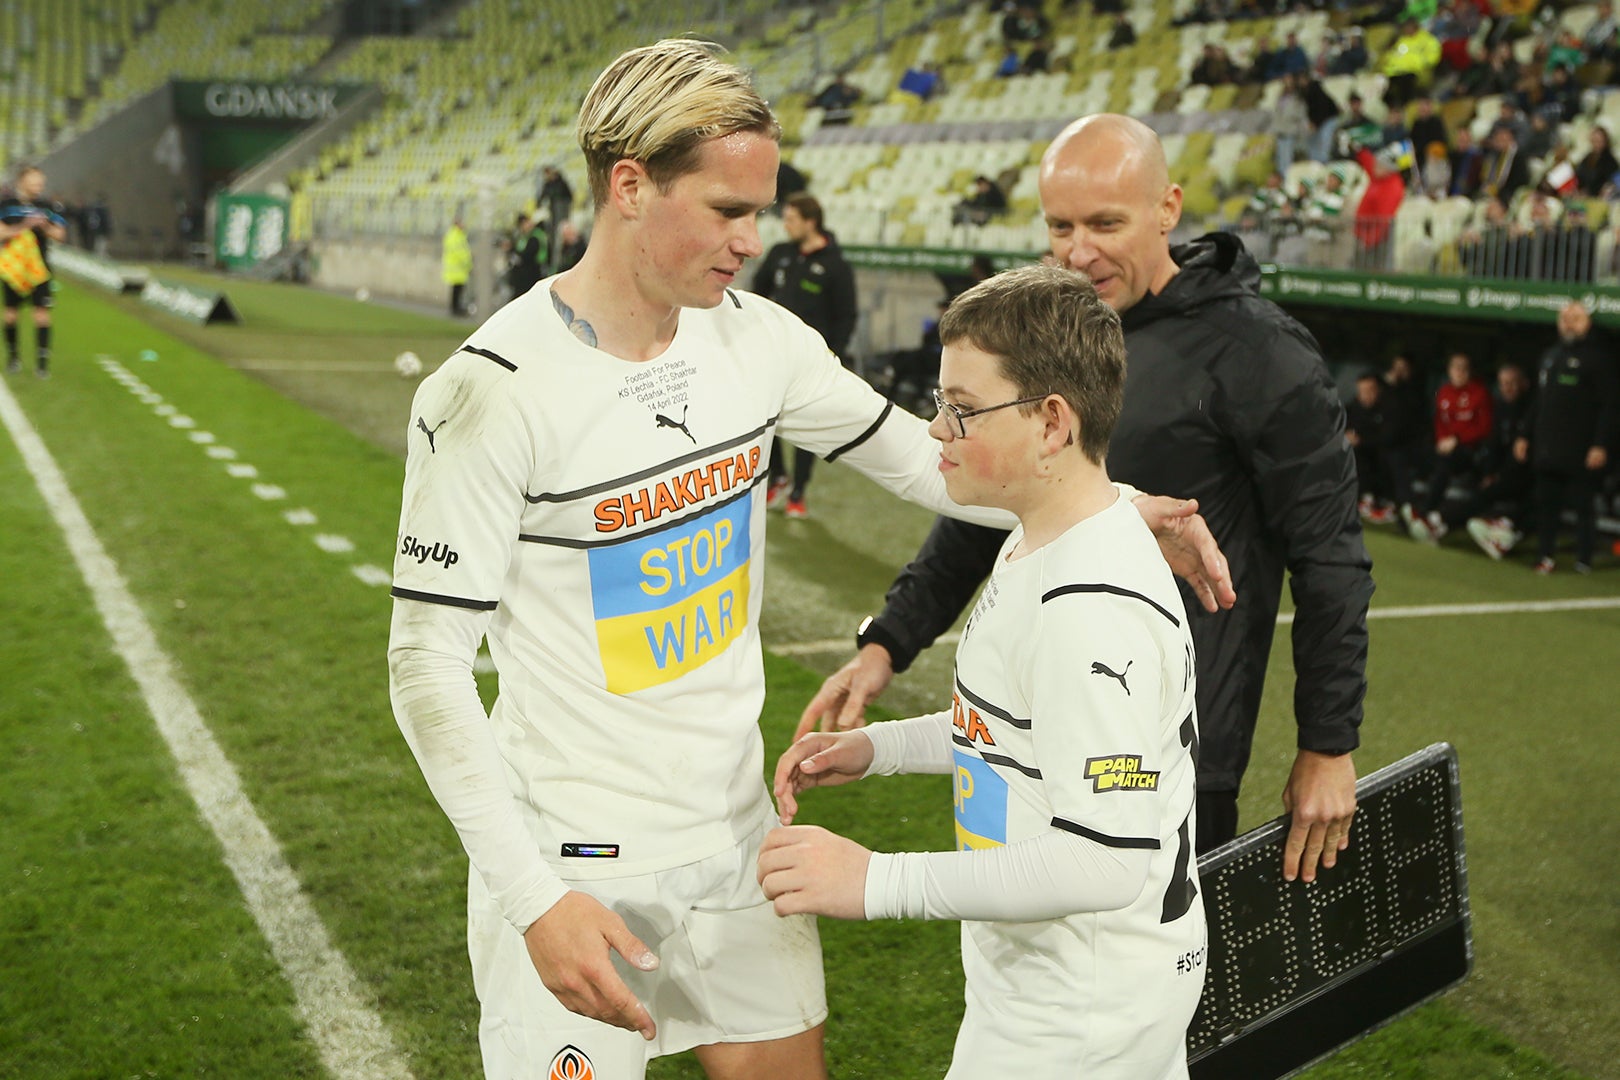 12-year-old Dmytro Keda is welcomed onto the pitch by midfielder Mykhaylo Mudryk (Shakhtar Donetsk/PA)